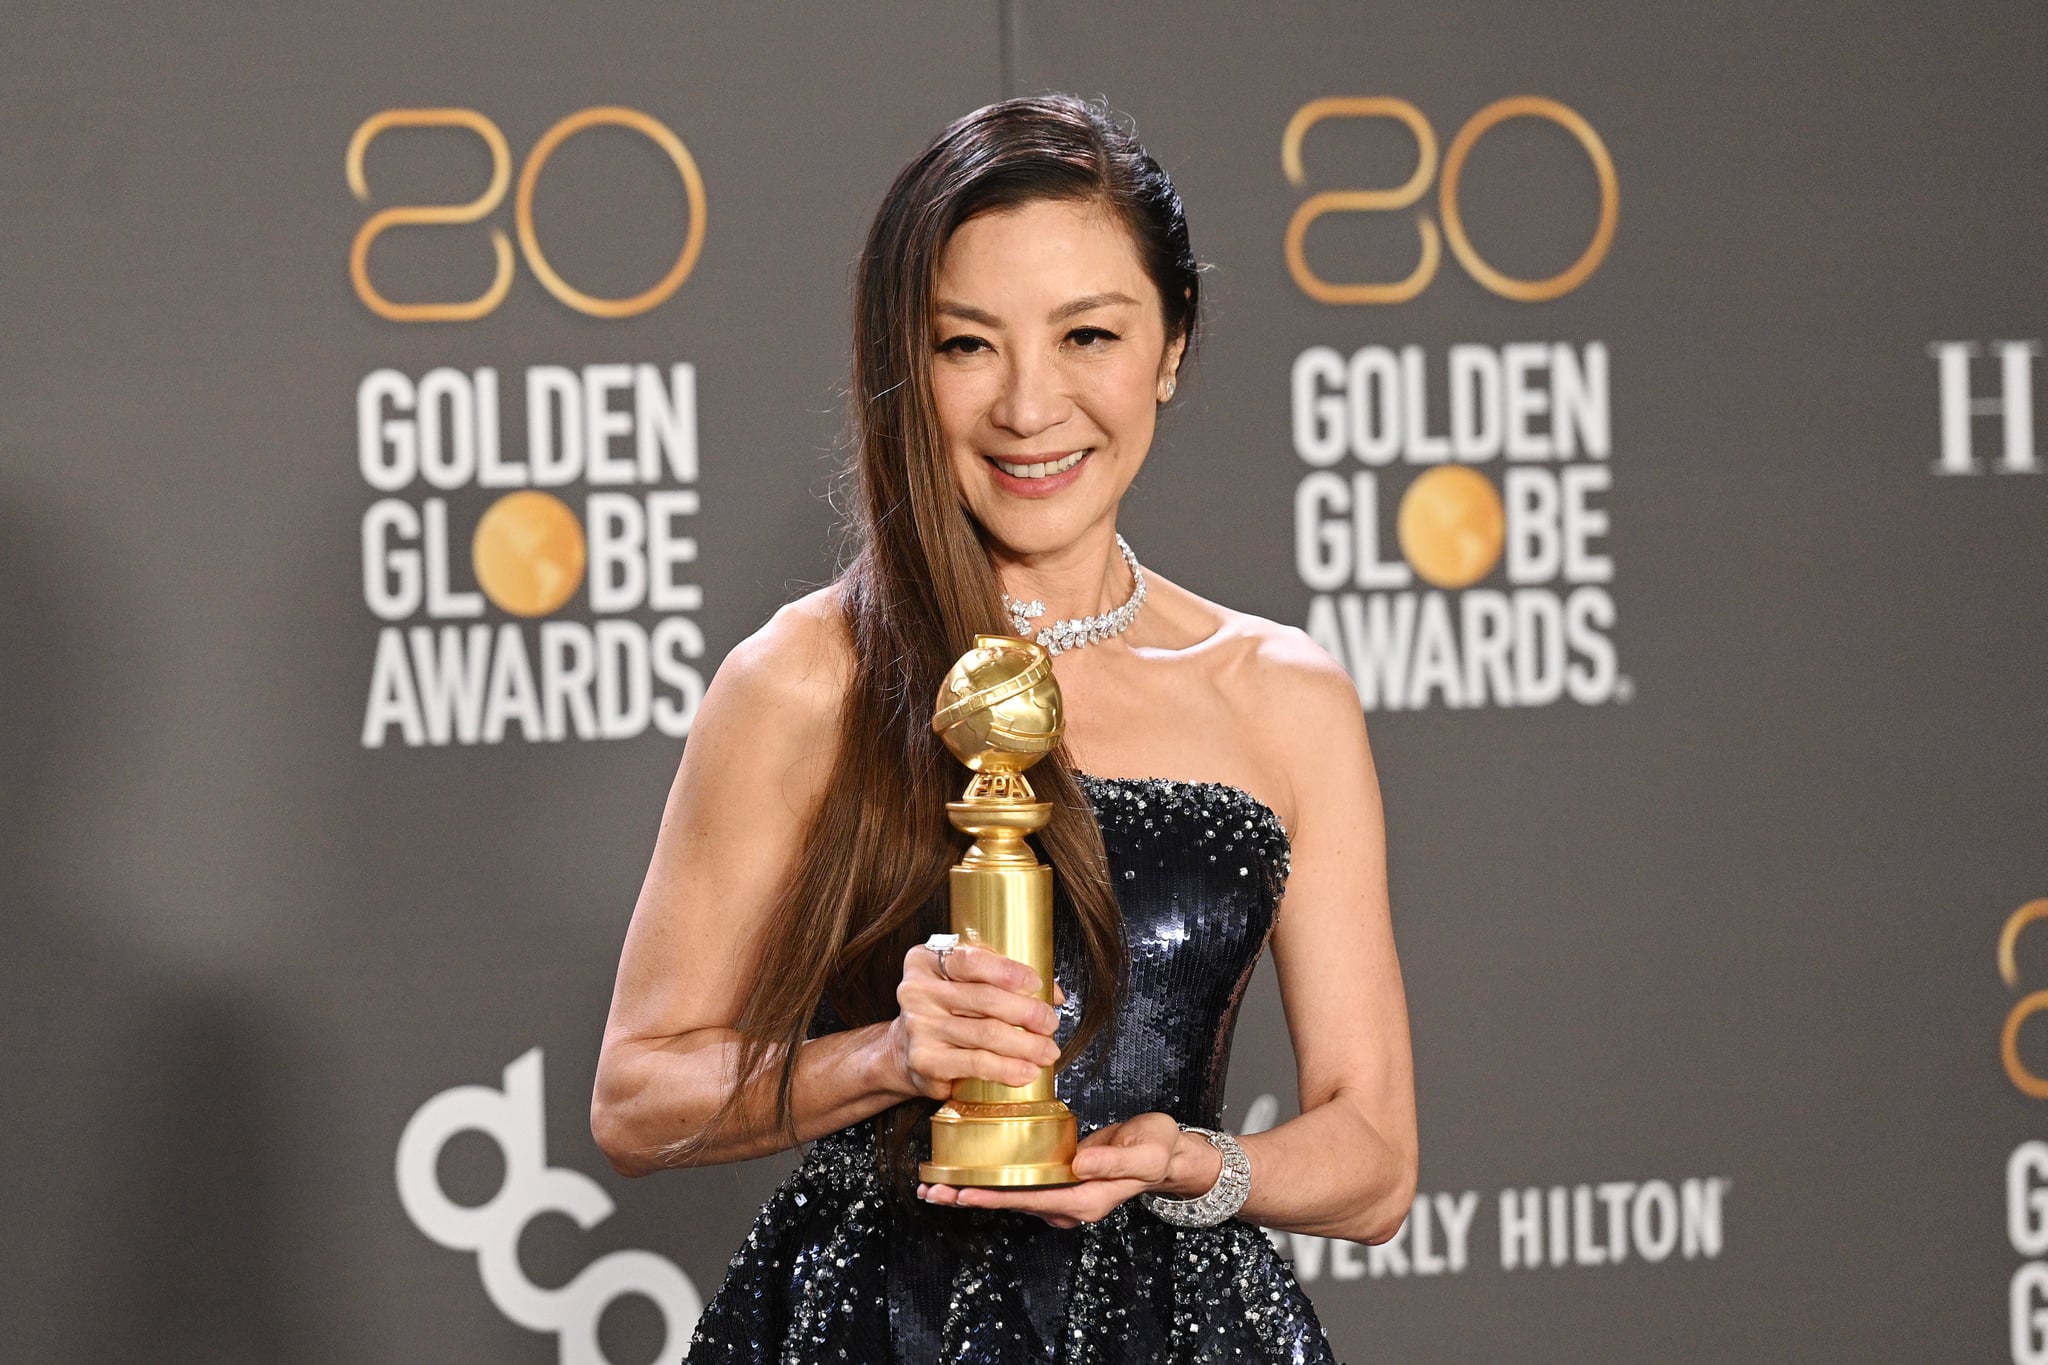 Michelle Yeoh at the 80th Annual Golden Globe Awards held at The Beverly Hilton on January 10, 2023 in Beverly Hills, California. (Photo by Gilbert Flores/Variety via Getty Images)